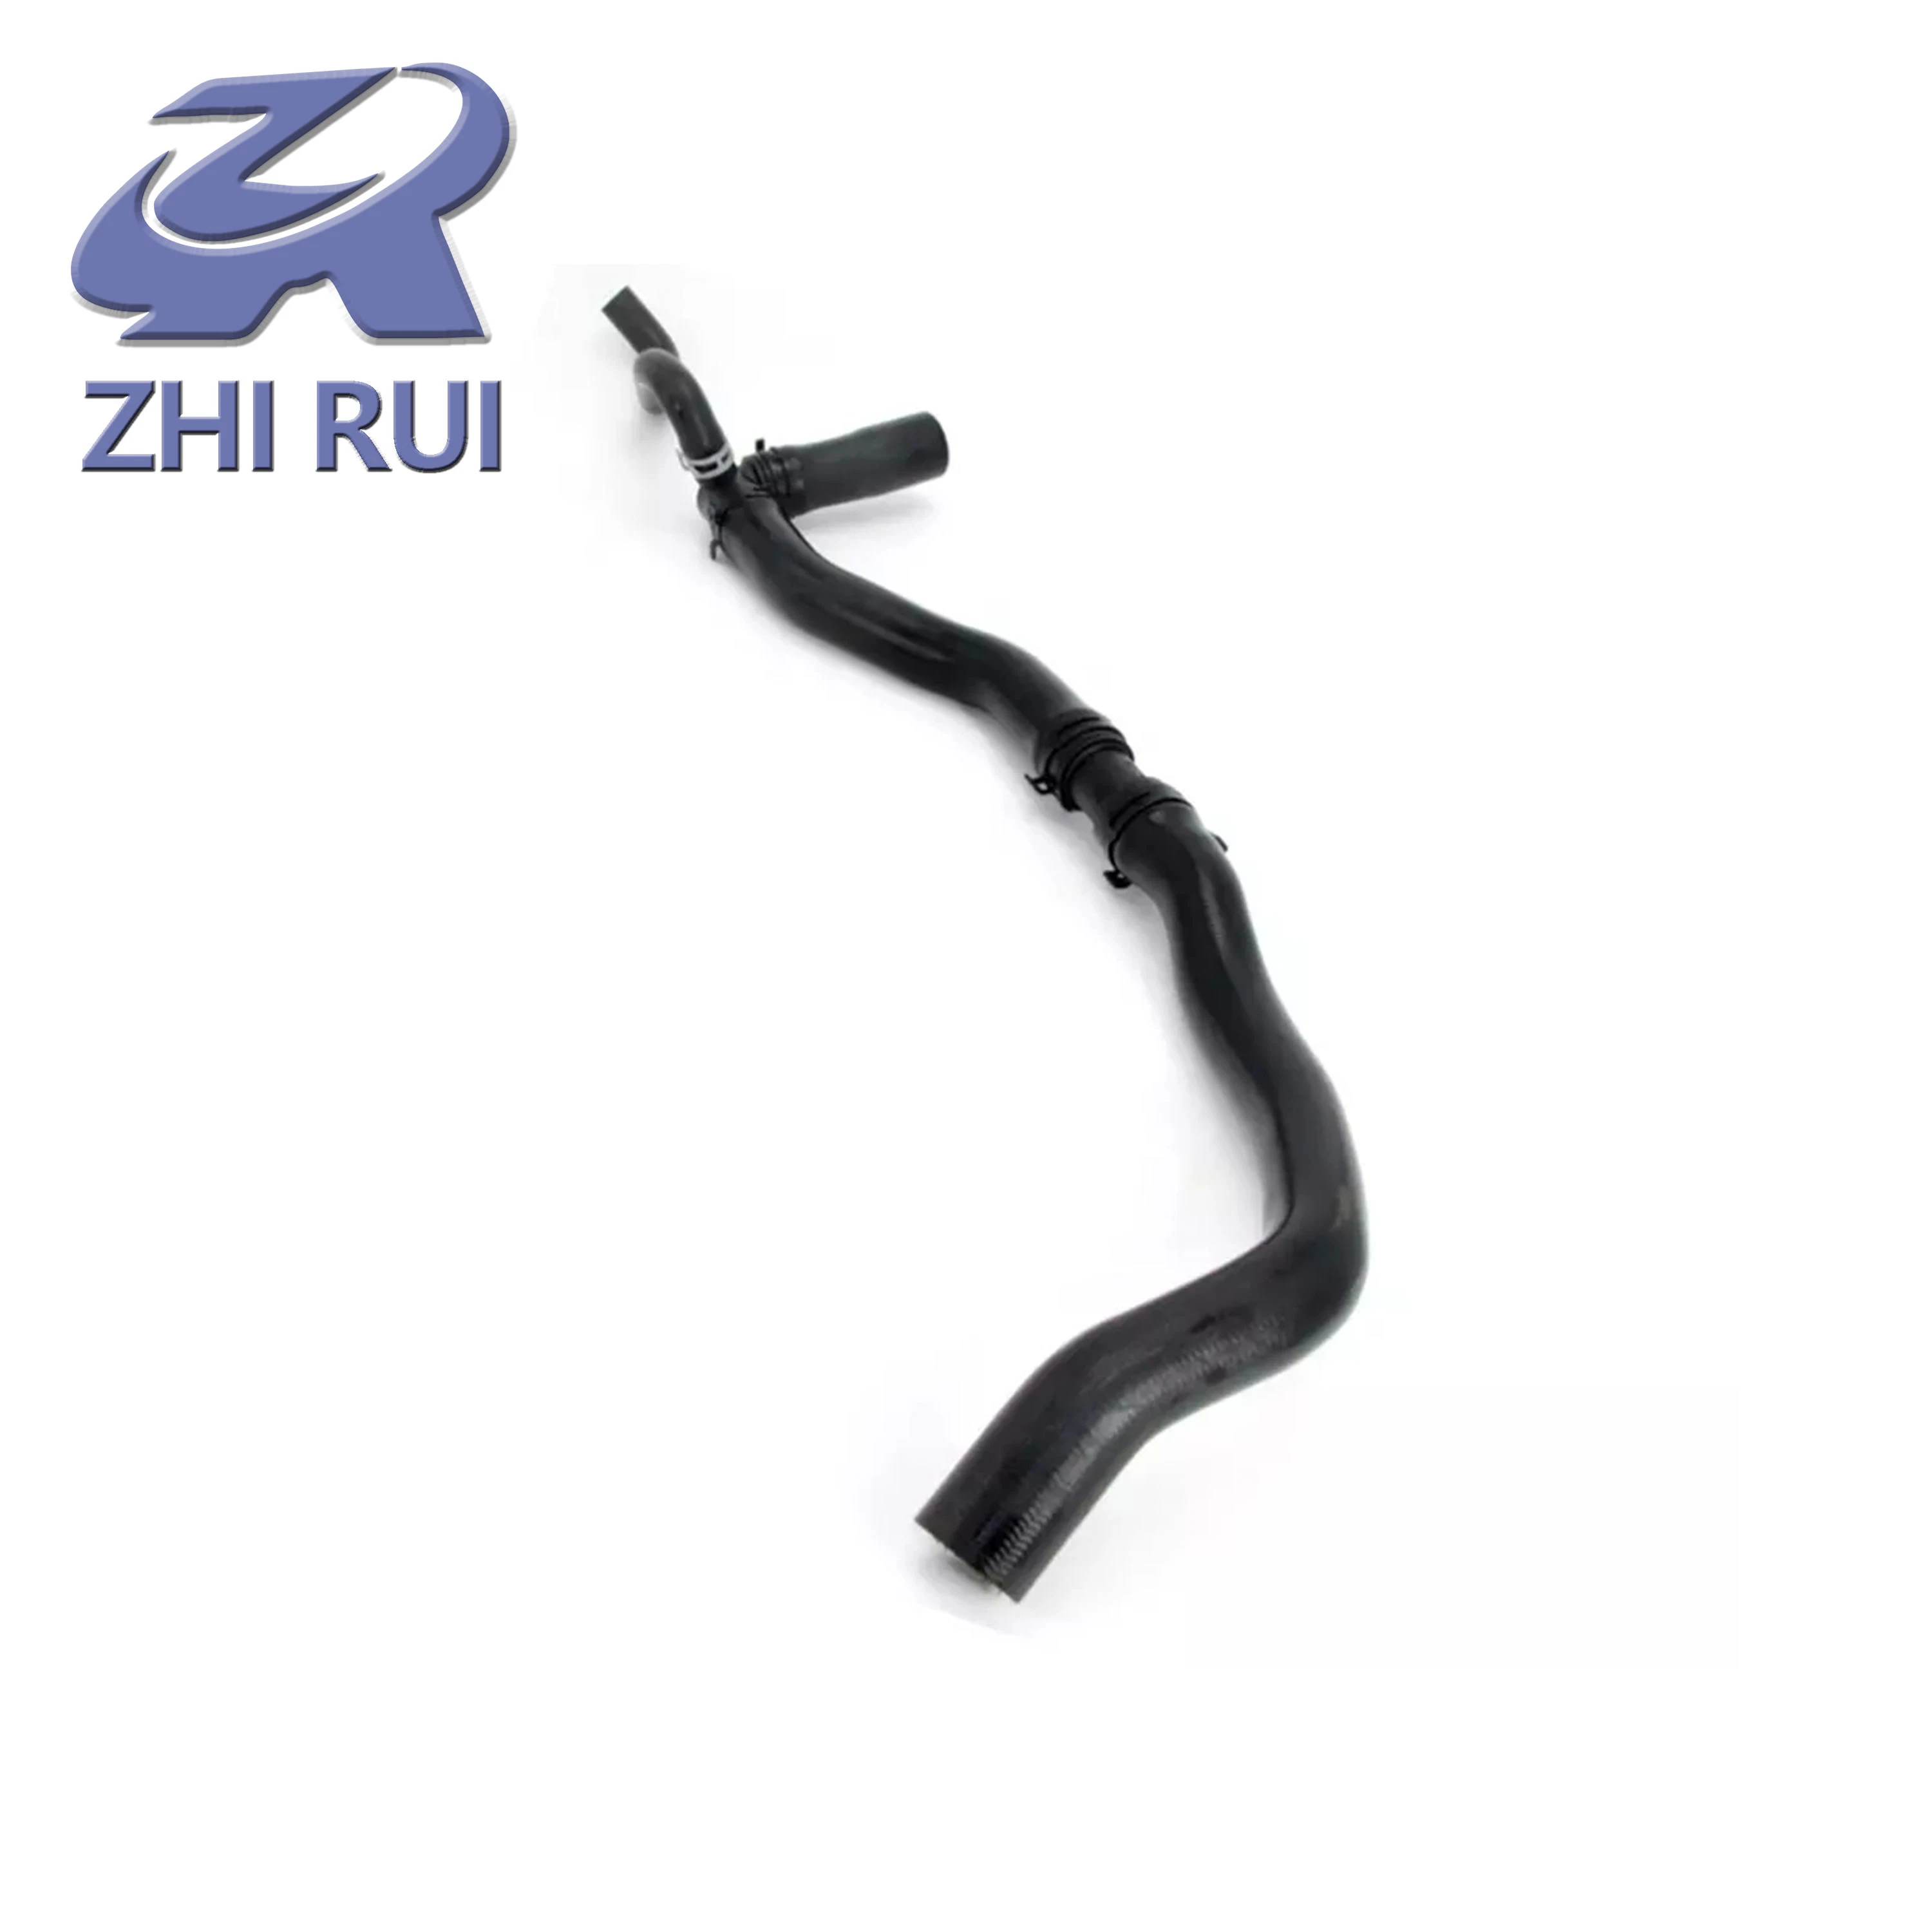 Auto Engine Radiator Coolant Hose Structure Cooling System Water Pipe for Auto Parts Xf 2.0t OEM C2z28162